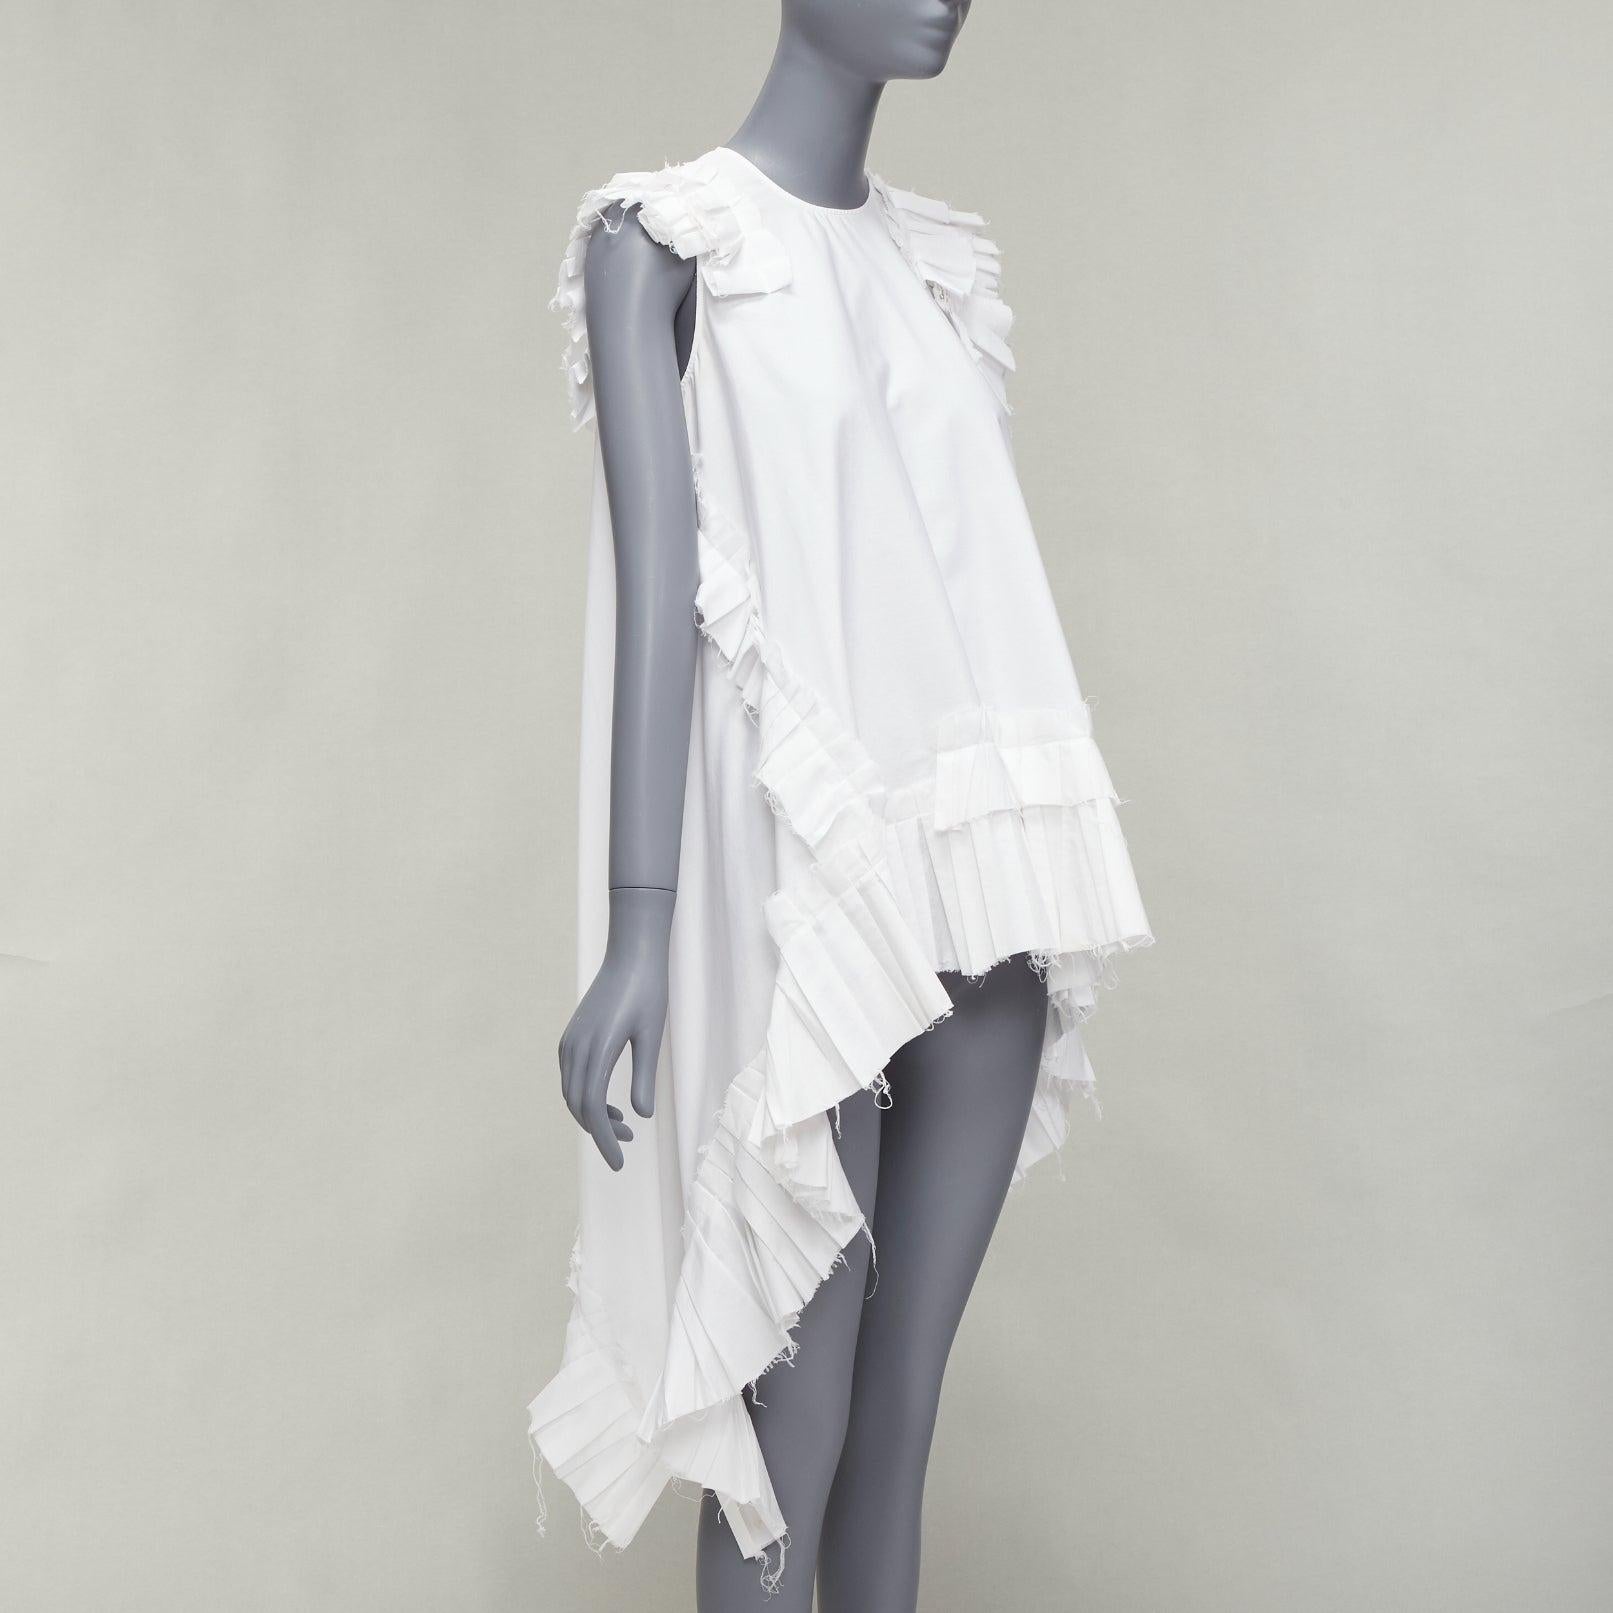 ALEXANDER MCQUEEN white cotton asymmetric ruffle high low hem tunic top IT38 XS
Reference: NKLL/A00227
Brand: Alexander McQueen
Designer: Sarah Burton
Material: Cotton
Color: White
Pattern: Solid
Closure: Keyhole Button
Made in: